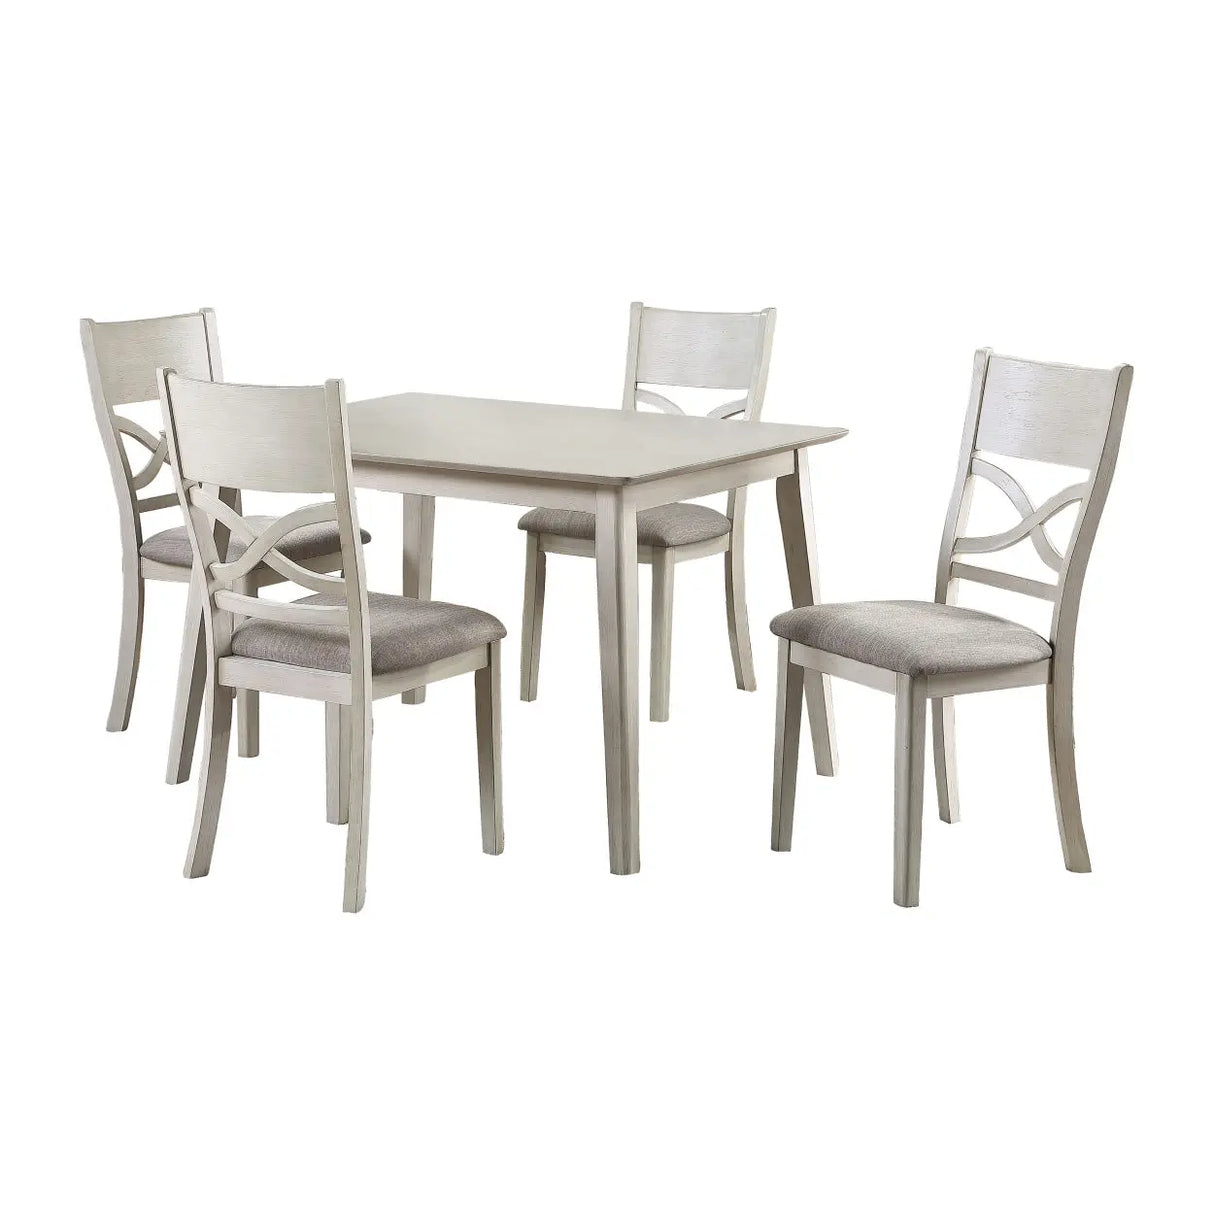 Antique 5 pc White Dining Set 5739 - Complete Home Furnish